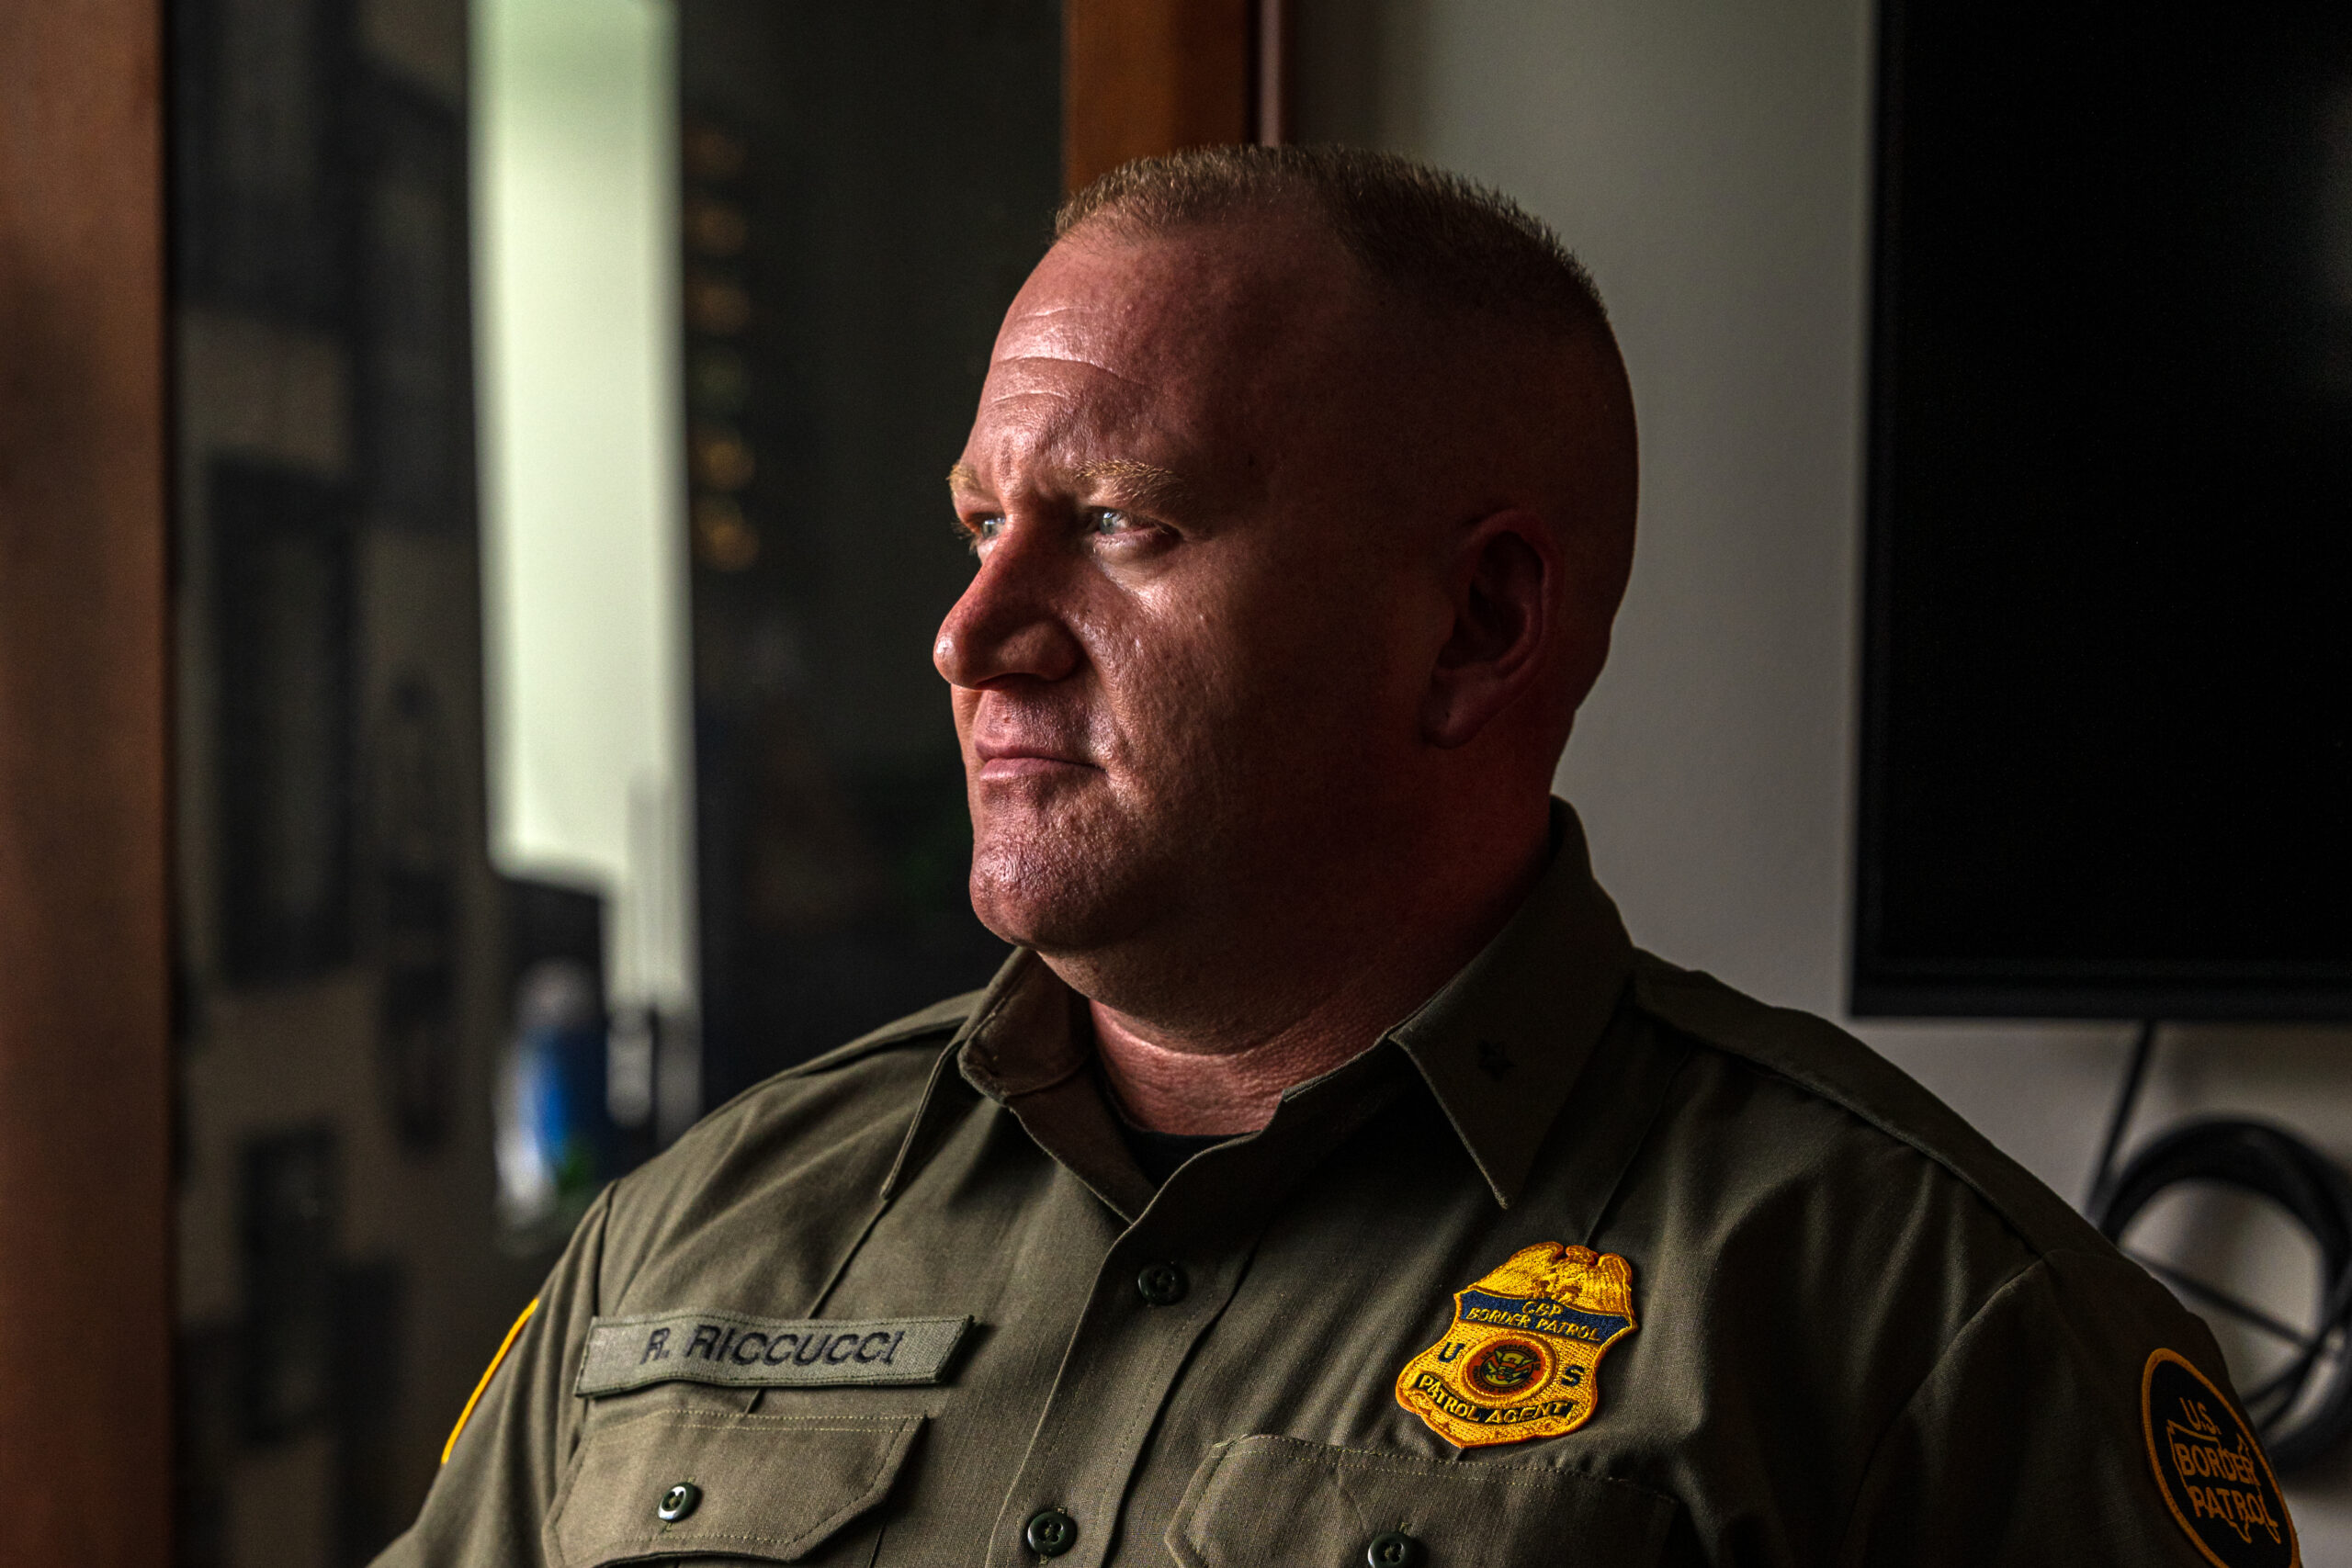 How a U.S. Customs and Border Protection veteran sees his agency’s mission